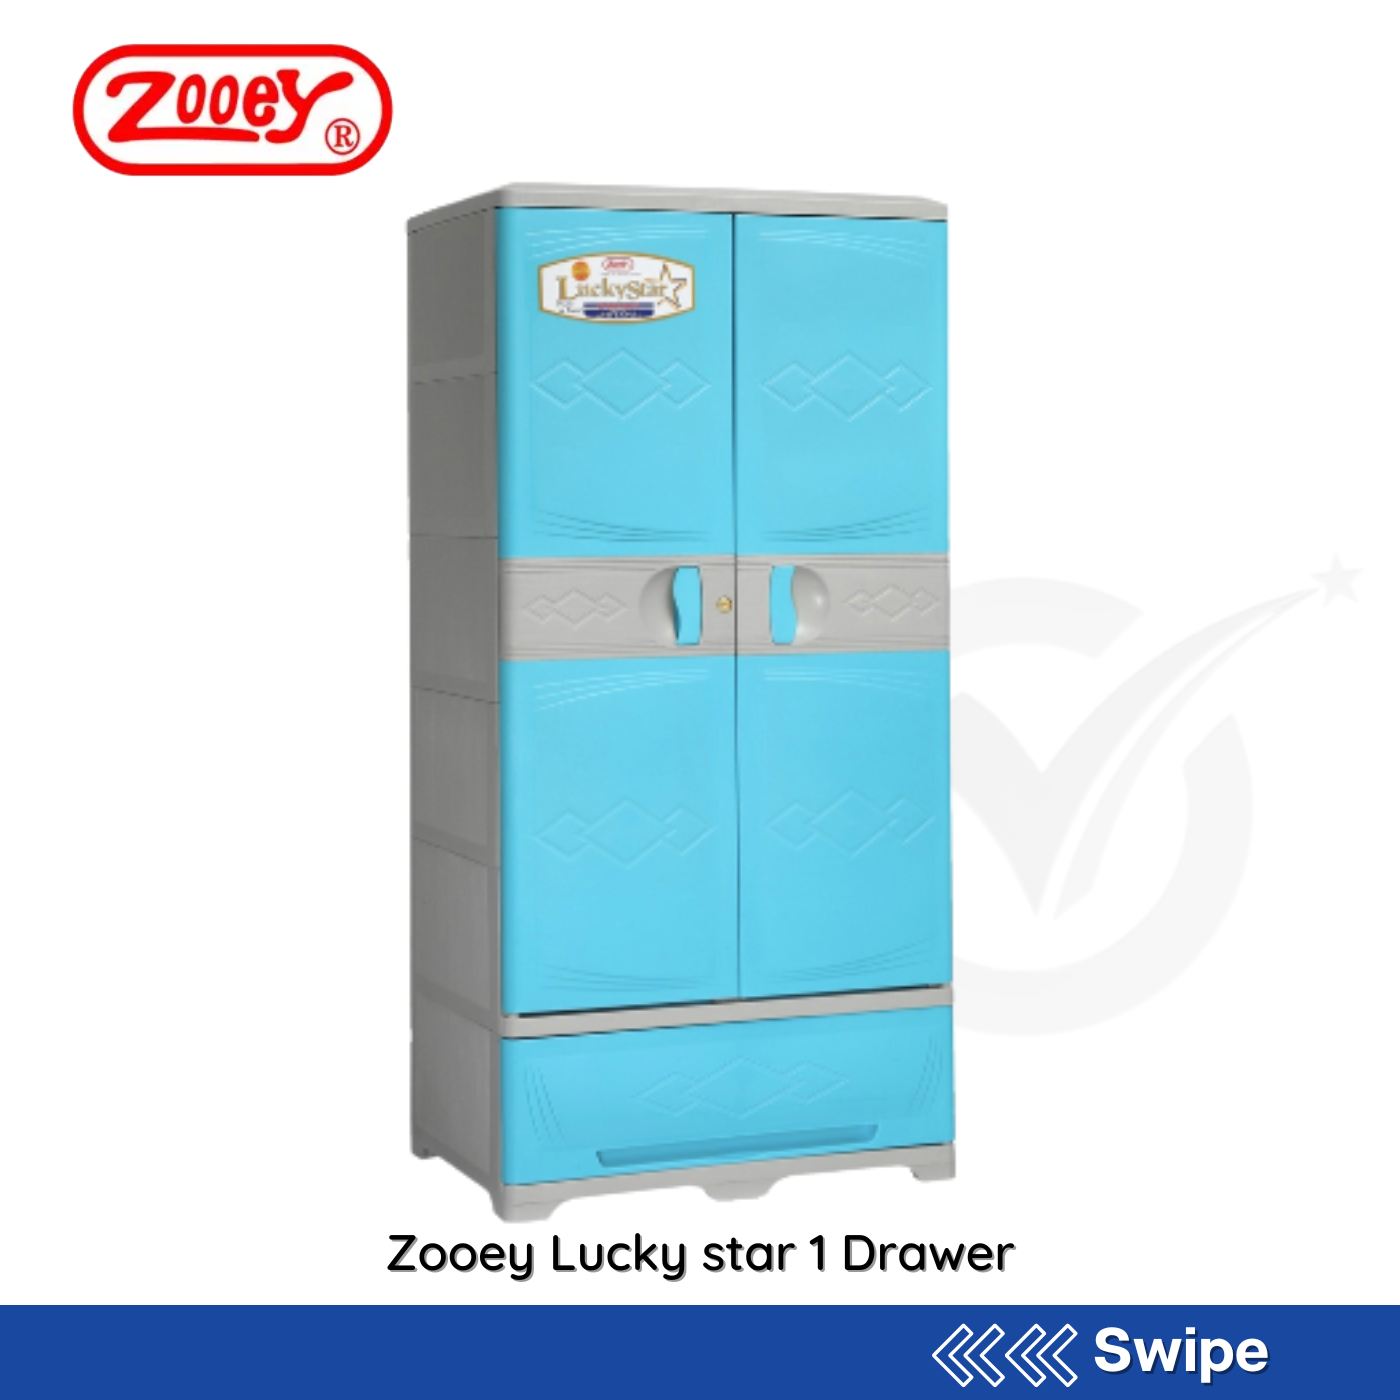 Zooey Lucky Star 1 Drawer